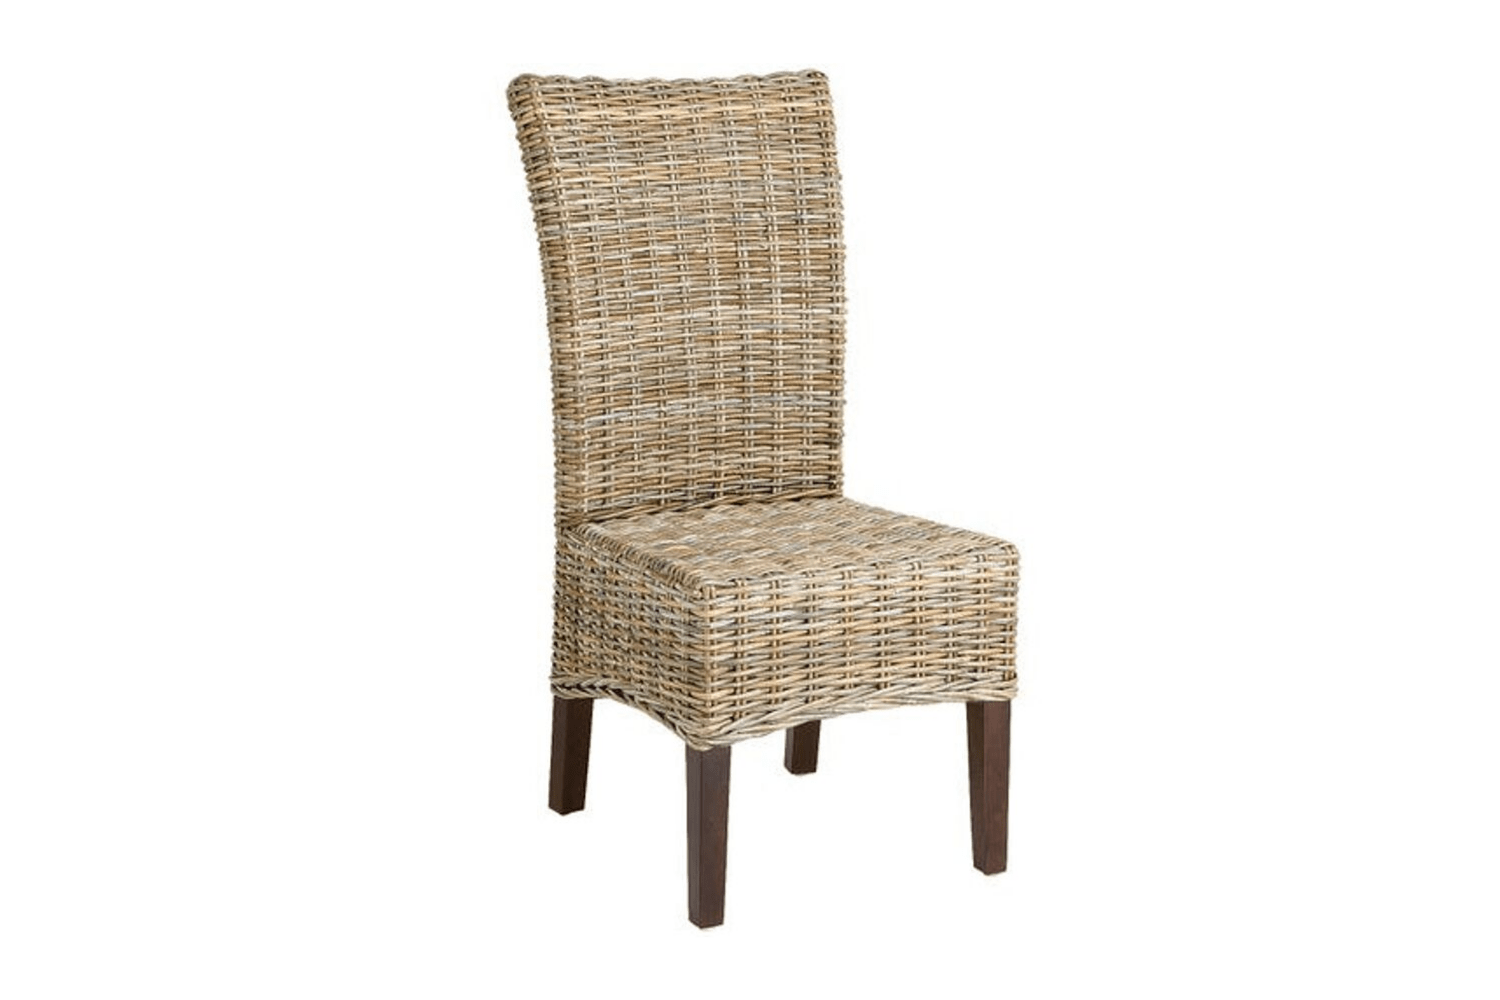 Wicker Dining Room Chairs Cape Town